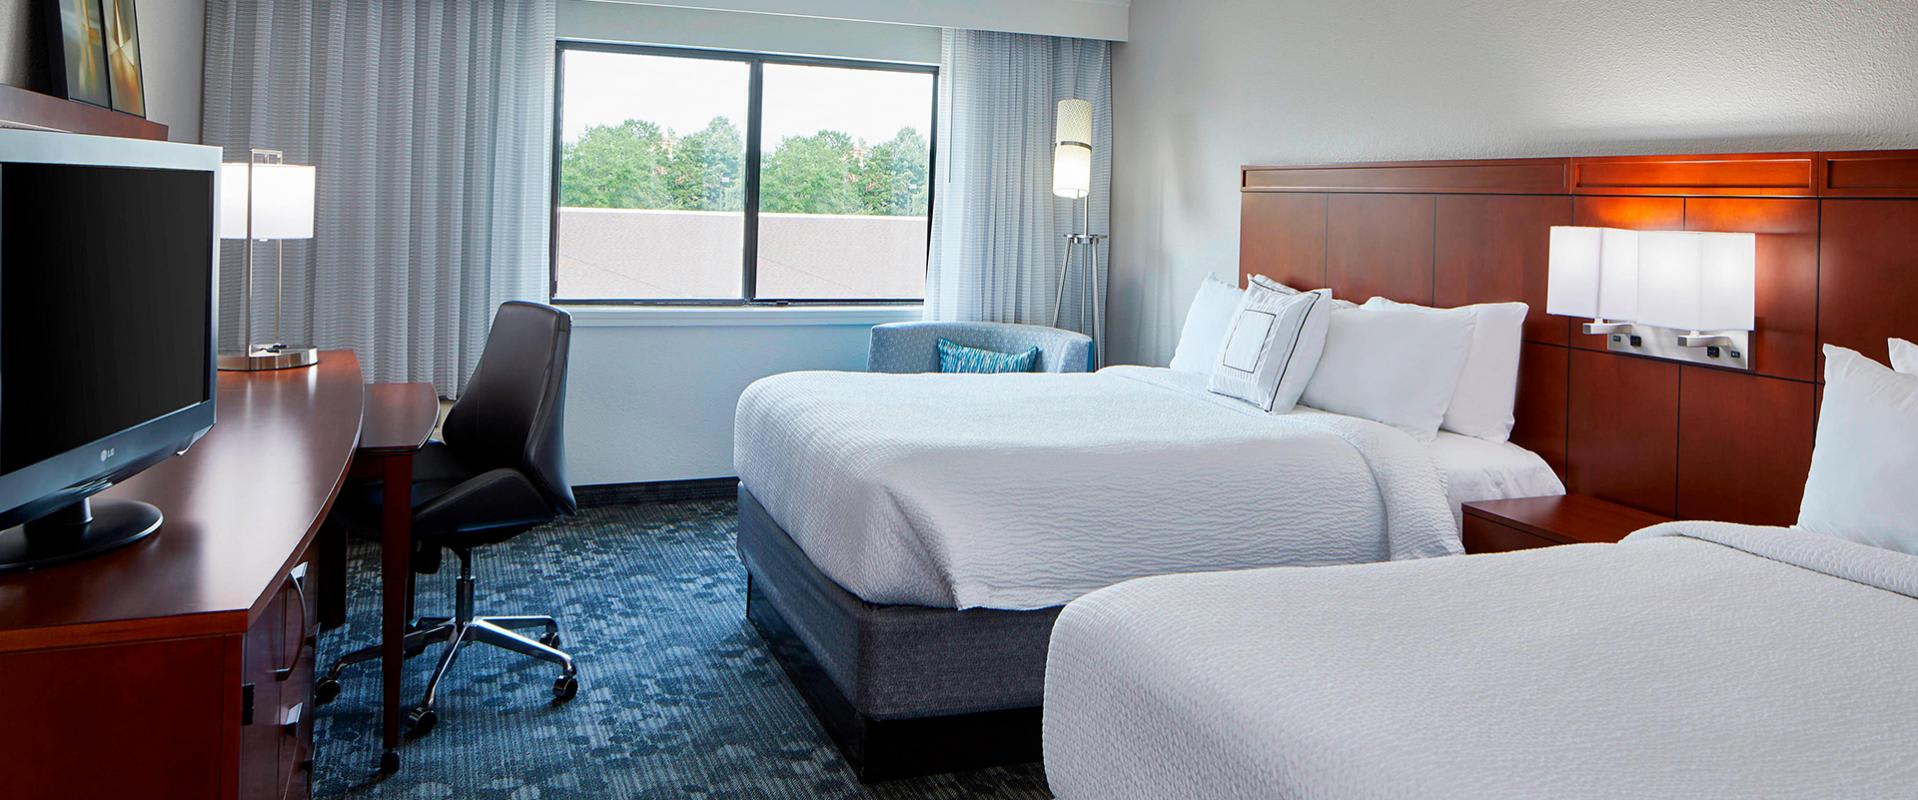 Raleigh Durham Airport Hotel Guest Room